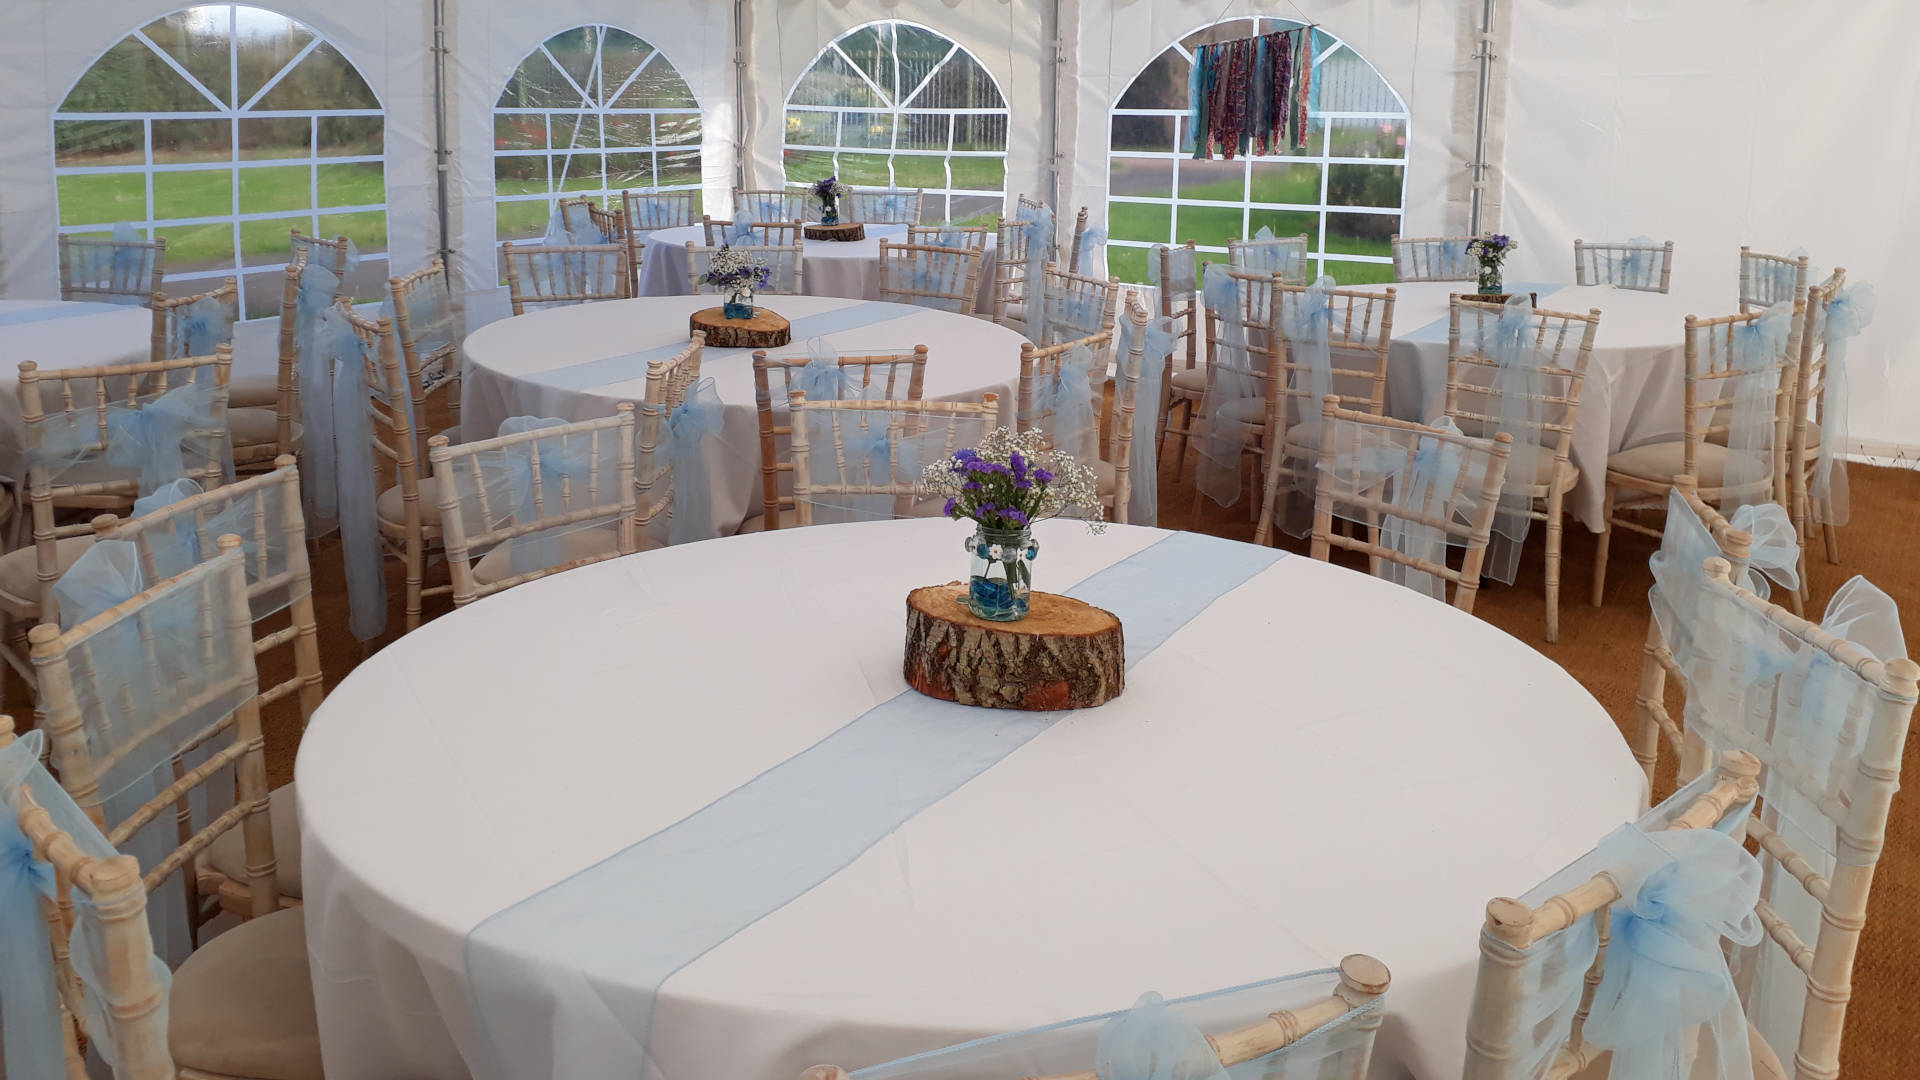 Marquee hire prices and extras